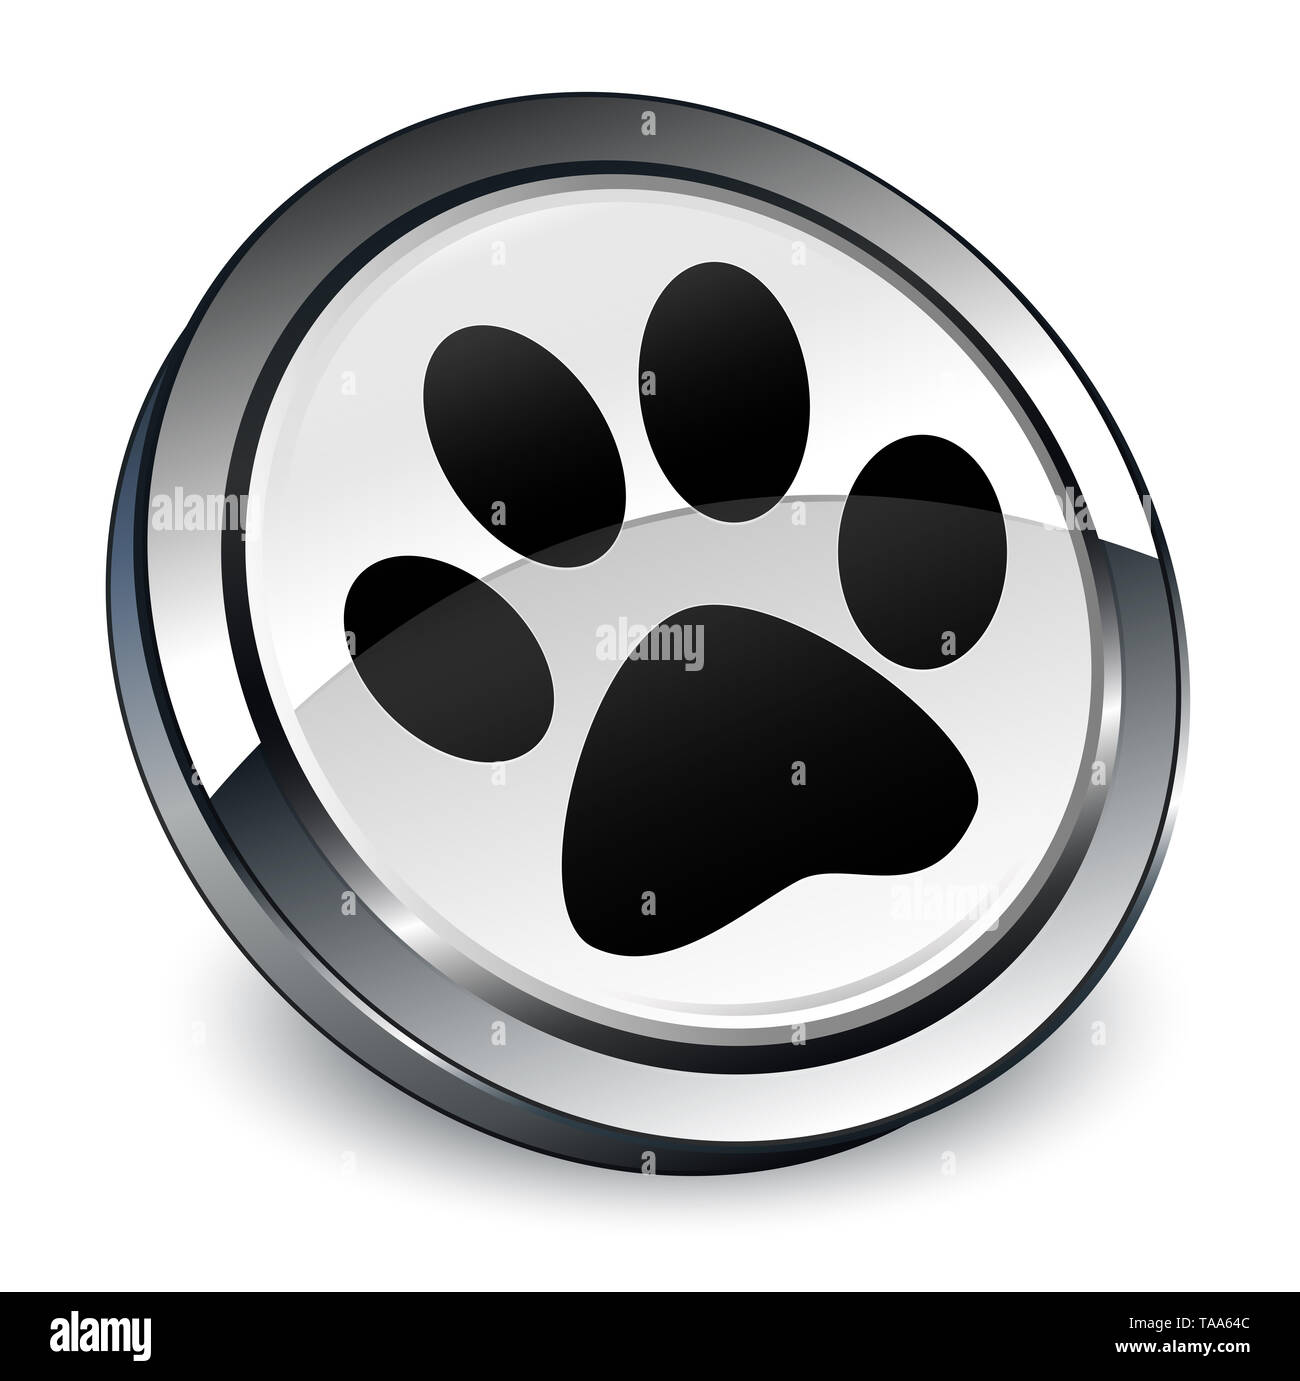 Animal footprint icon isolated on 3d white round button abstract illustration Stock Photo